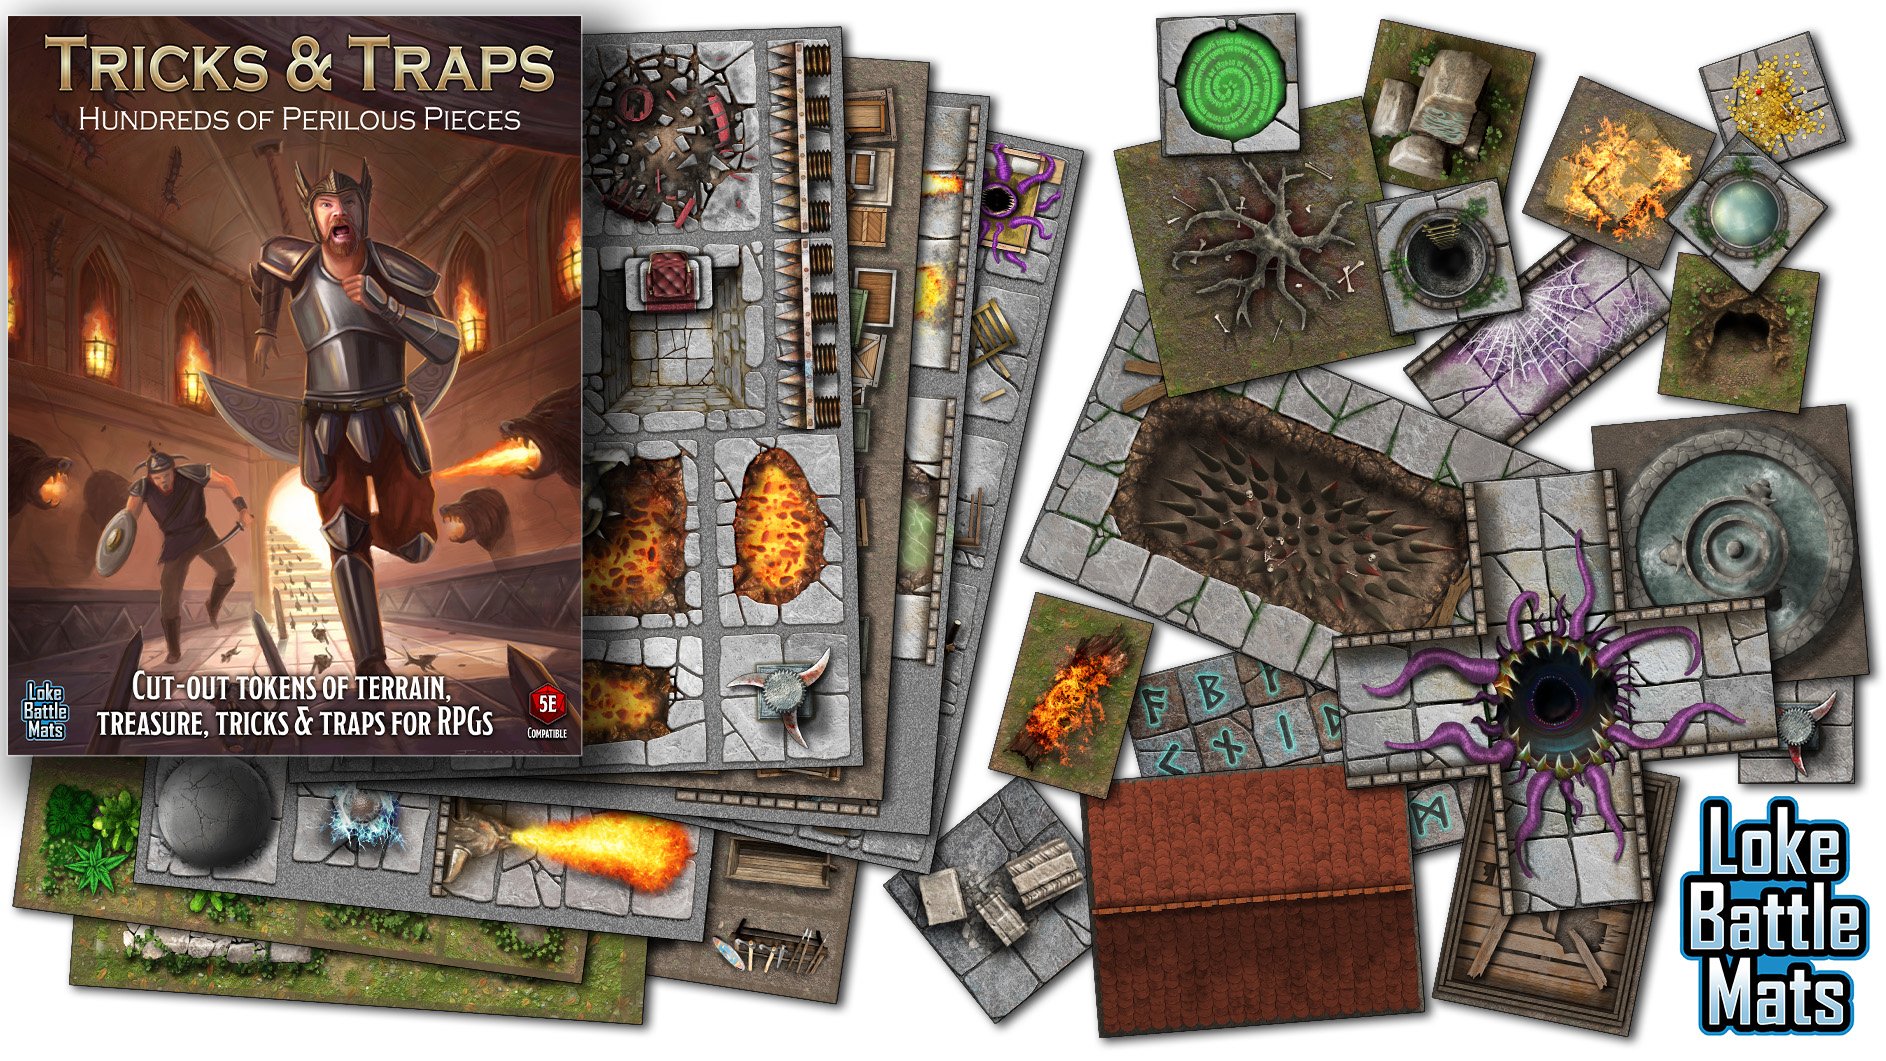 LokeBattleMats @Dragonmeet on X: Lets cheer up January with a Giveaway!  Chance to win Towns & Taverns Battle Map Books before they hit the shops on  Jan 27! One lucky winner wins